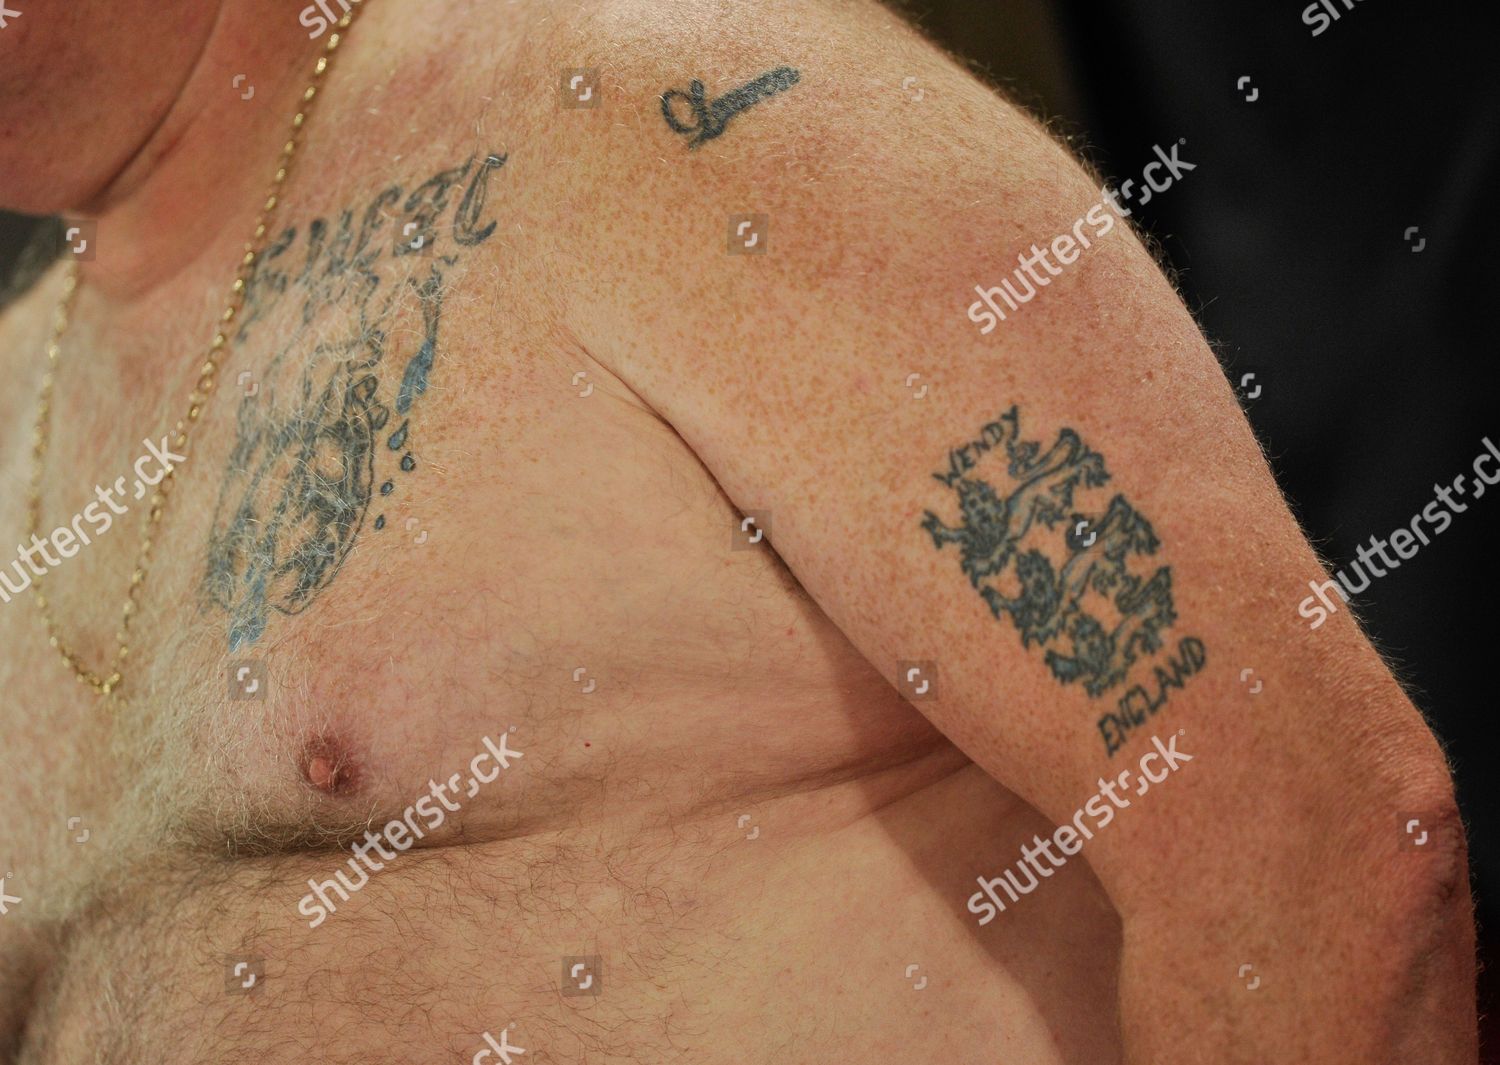 Shirtless England Fan 3 Lions Tattoo Editorial Stock Photo  Stock Image   Shutterstock